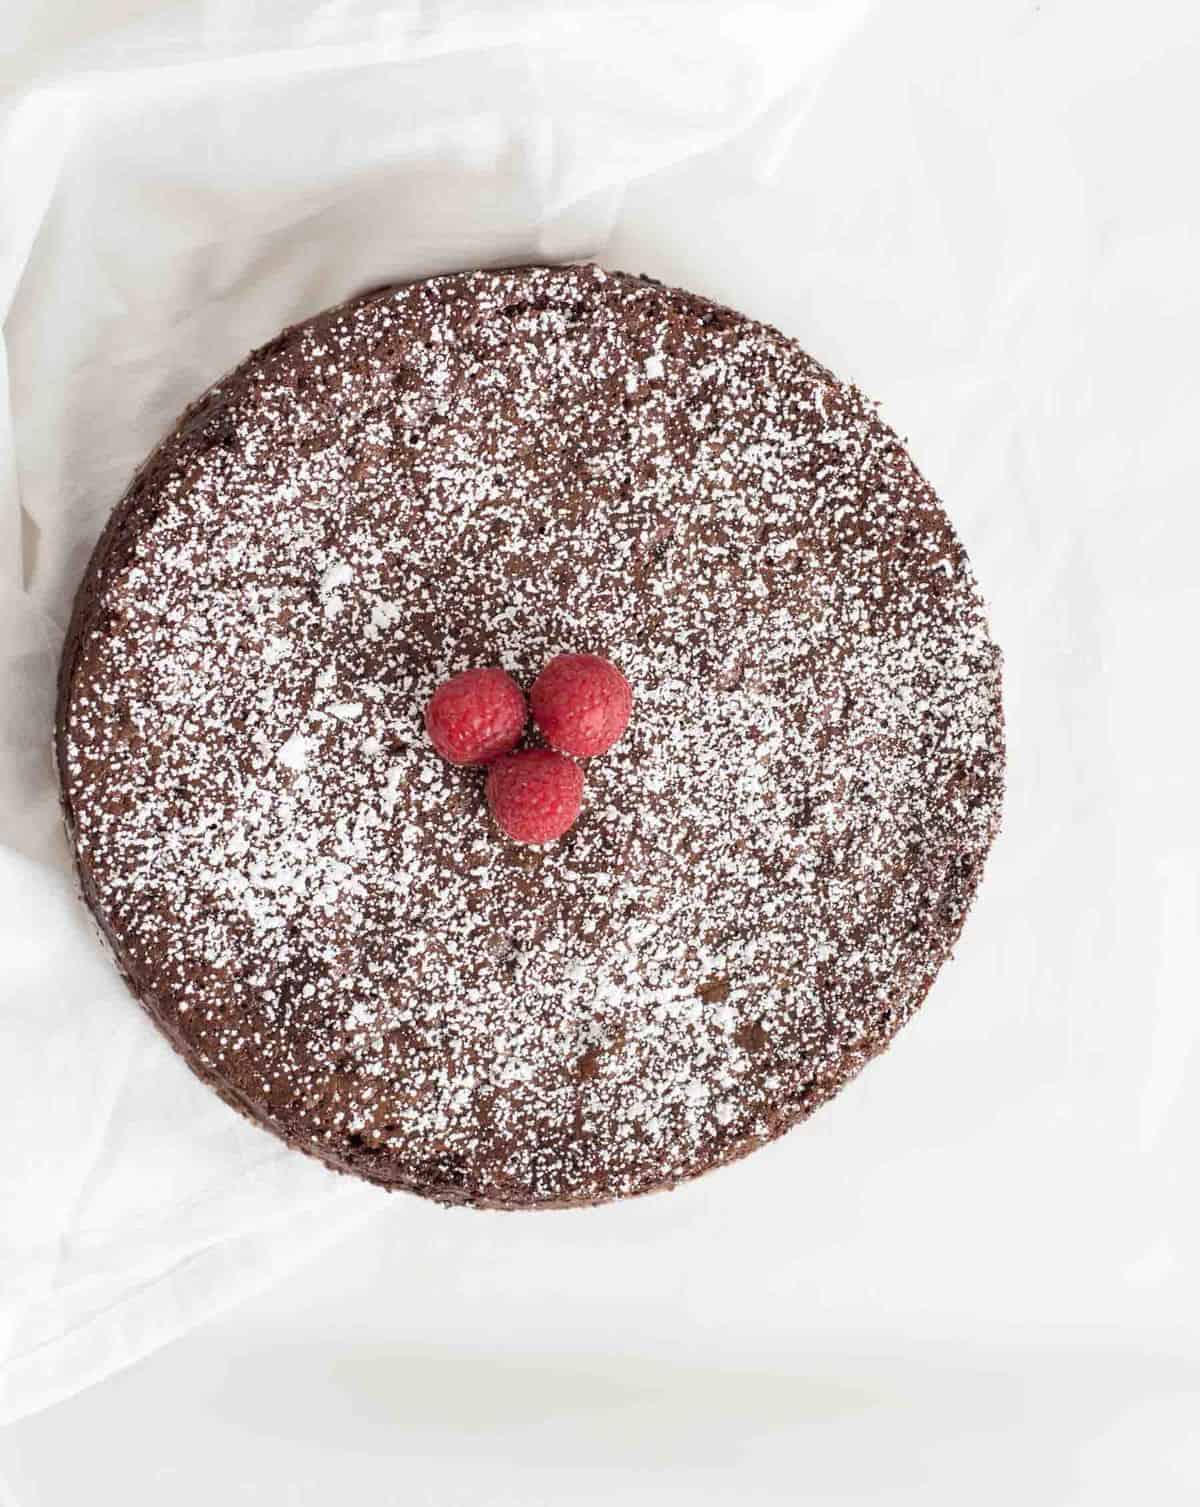 Light and fluffy flourless chocolate torte recipe made from just three simple ingredients. You won't believe how delicious this flourless chocolate torte is.